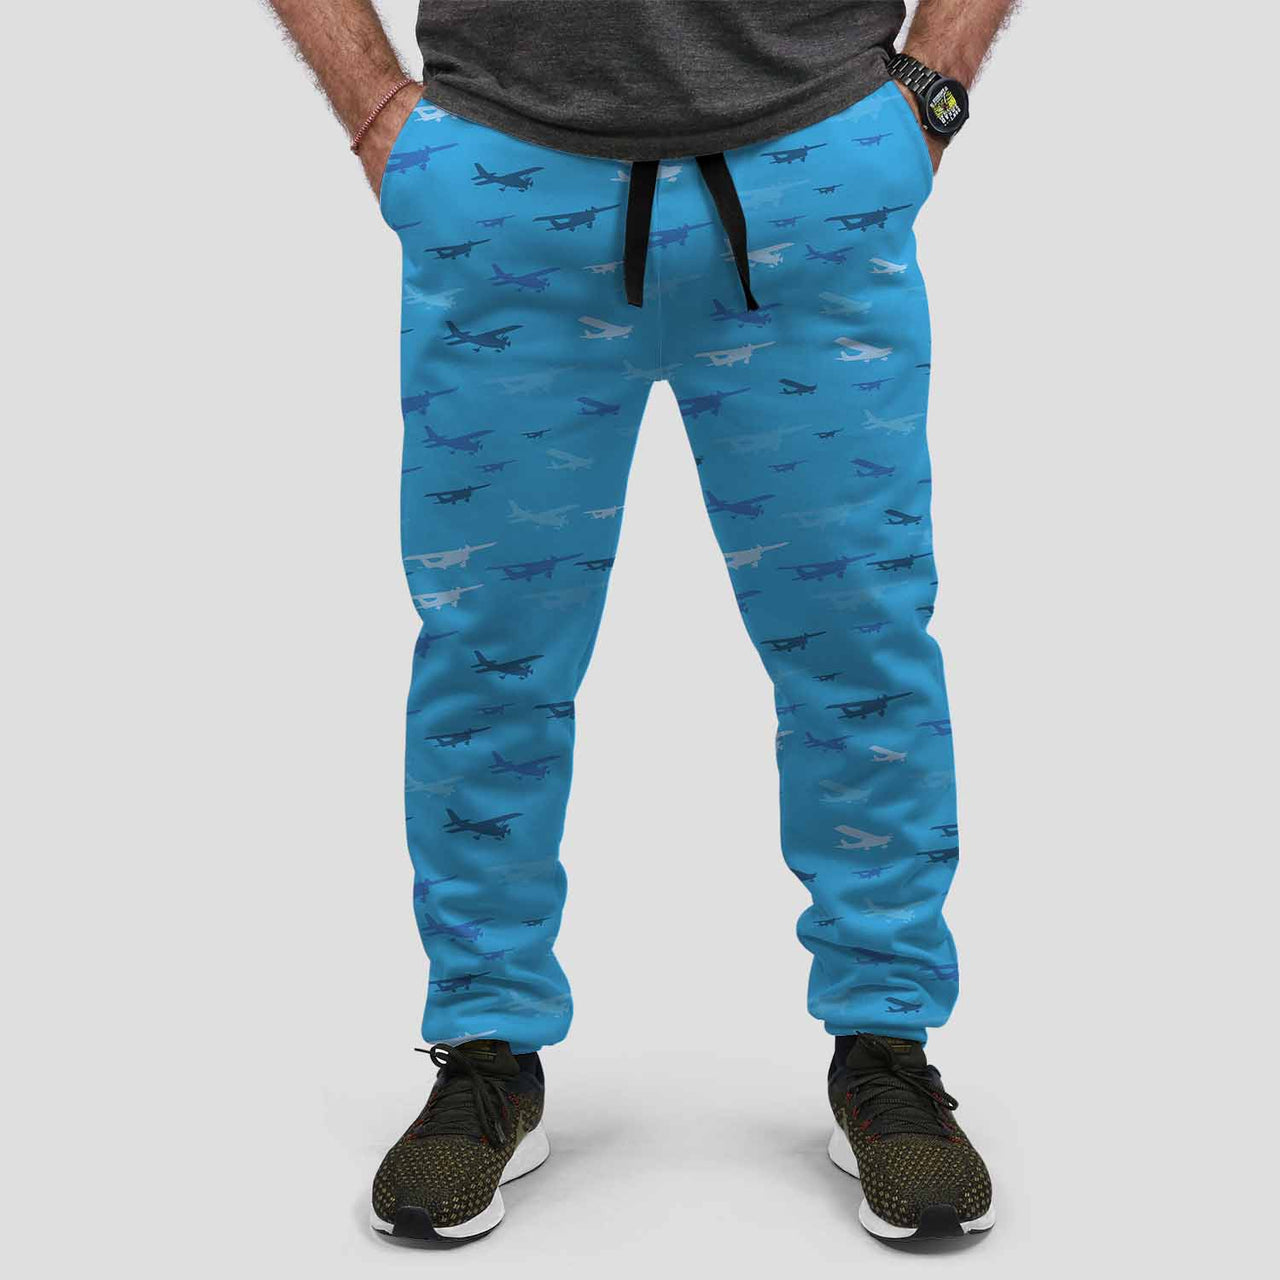 Many Propellers Designed Sweat Pants & Trousers